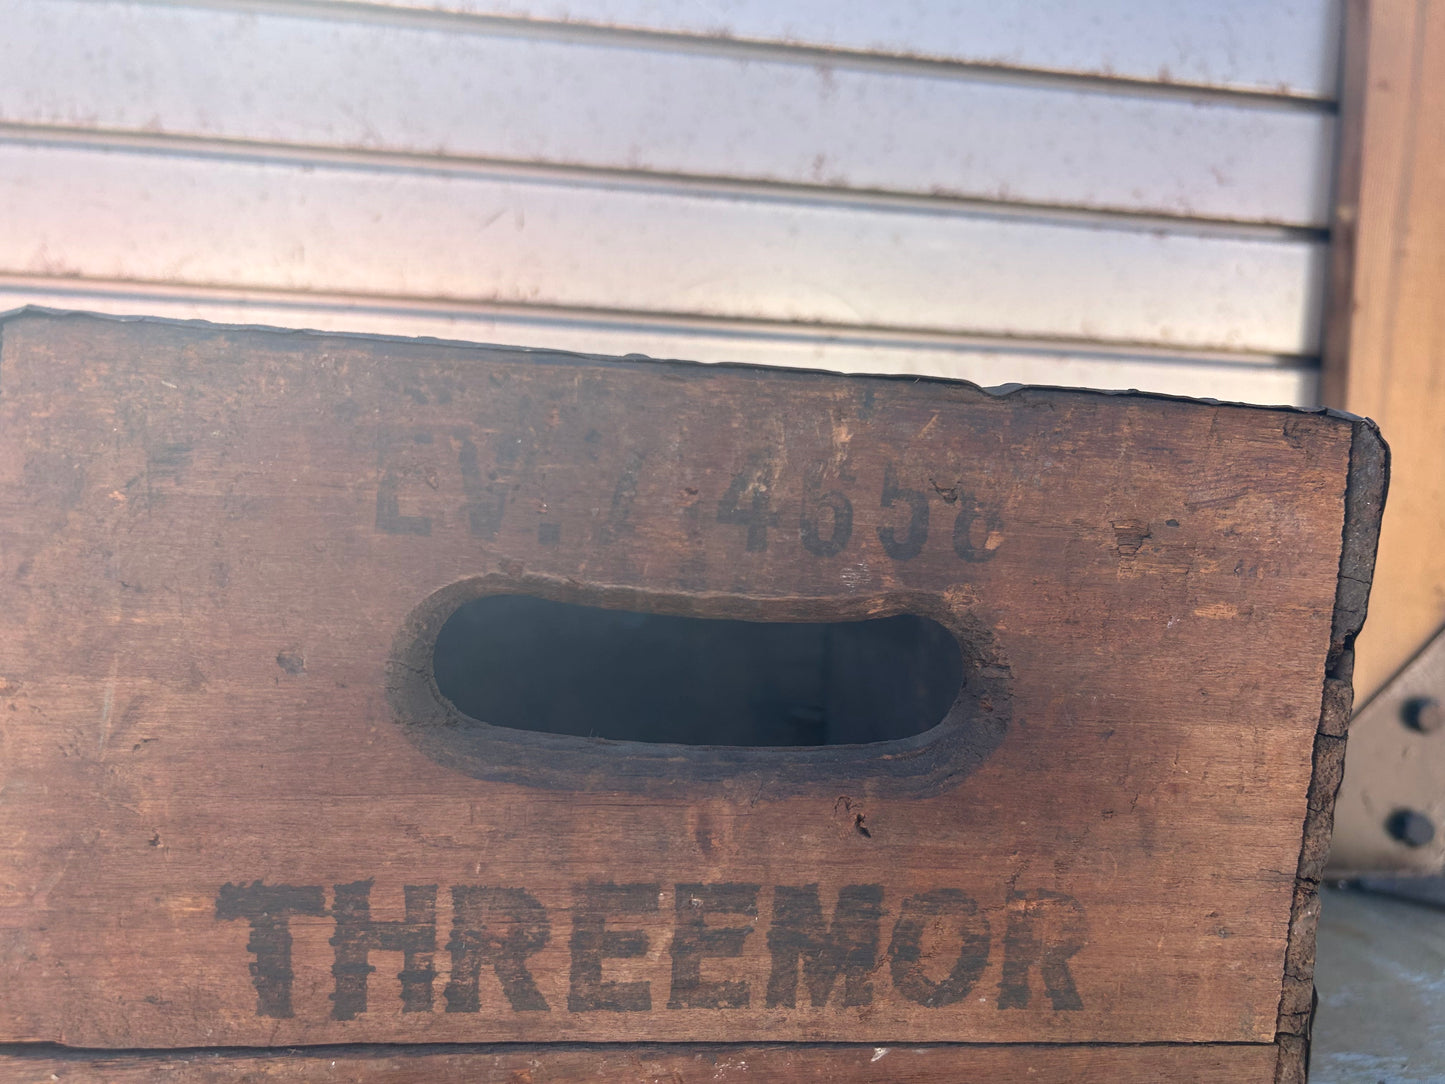 Vintage Threemor Milk Chocolate Small Bottle Wooden Crate from Brooklyn, NY - Good Condition